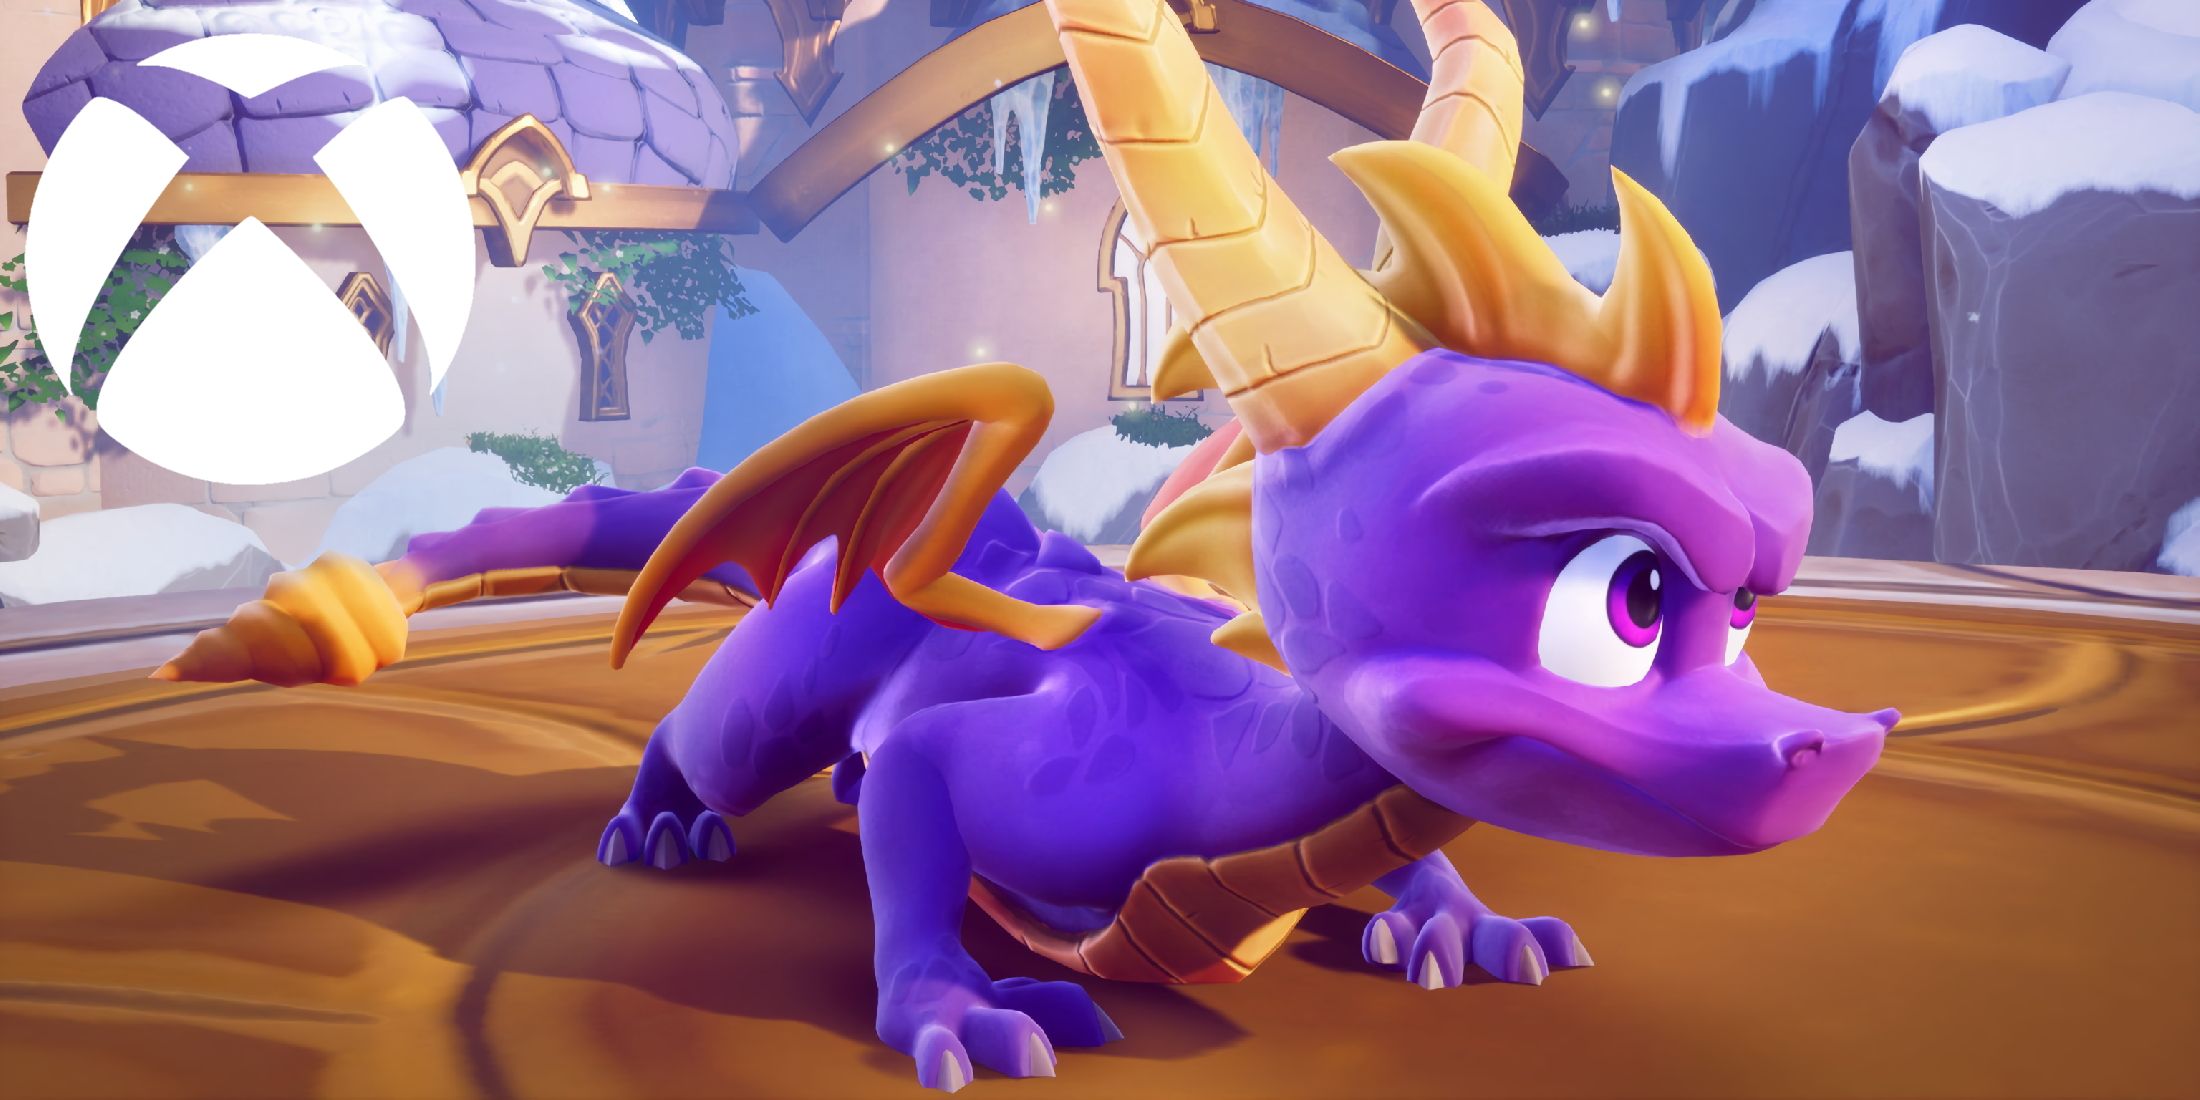 An image of Spyro the Dragon with the Xbox logo in the top-left